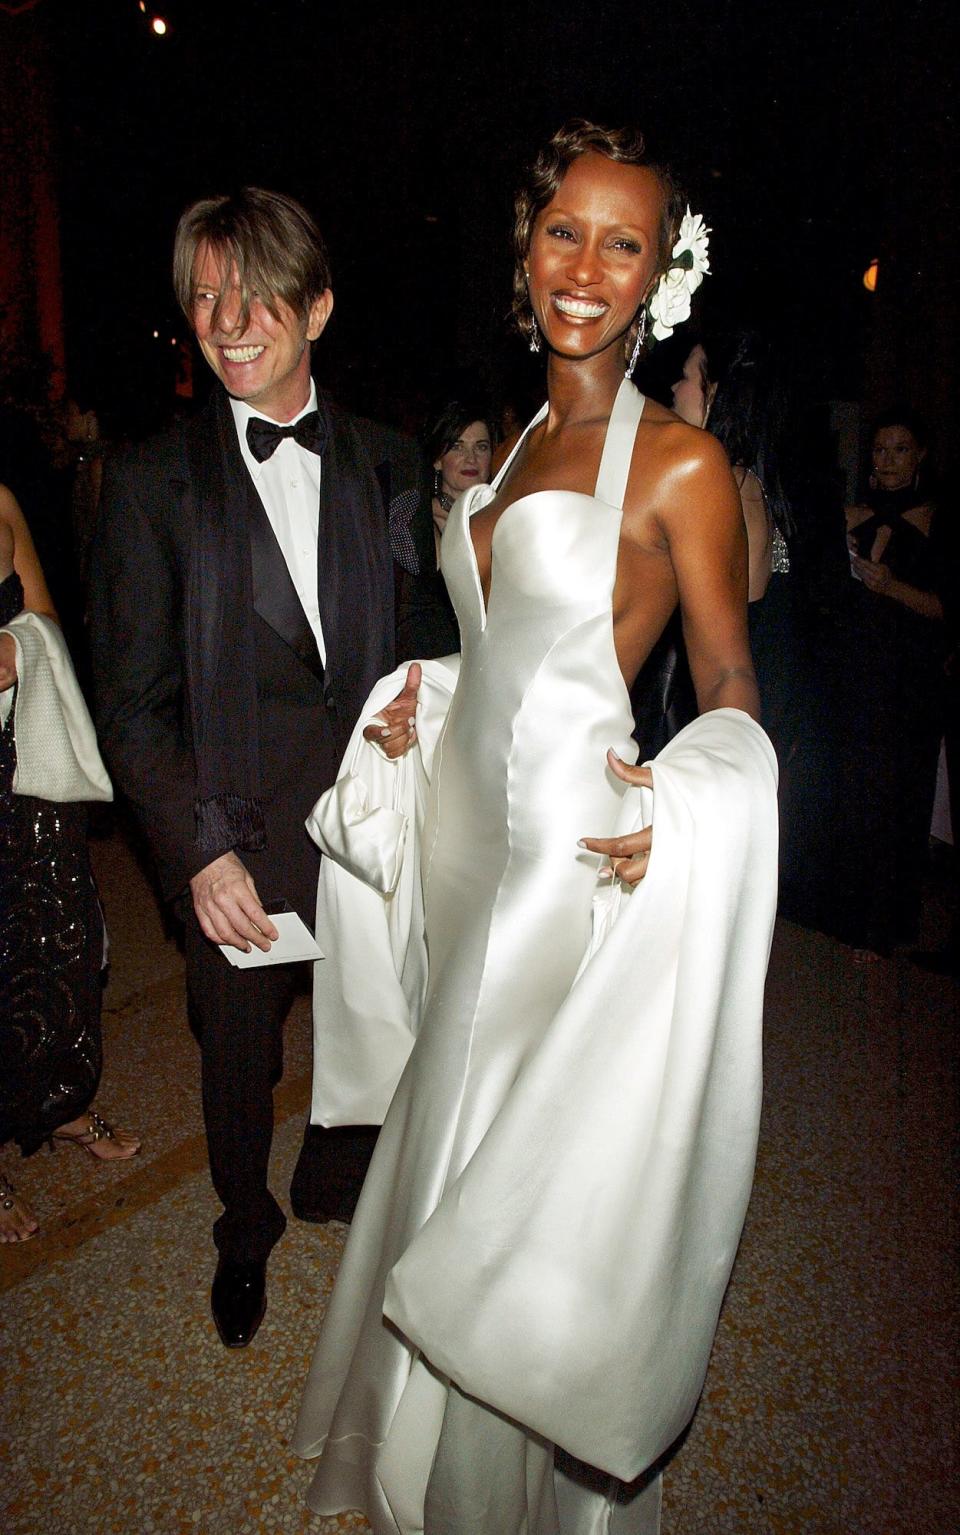 David Bowie and Iman smile at the 2003 Met Gala. Bowie is wearing a black suit with a scarf, and Iman wears a white silk gown with white flowers in her hair.